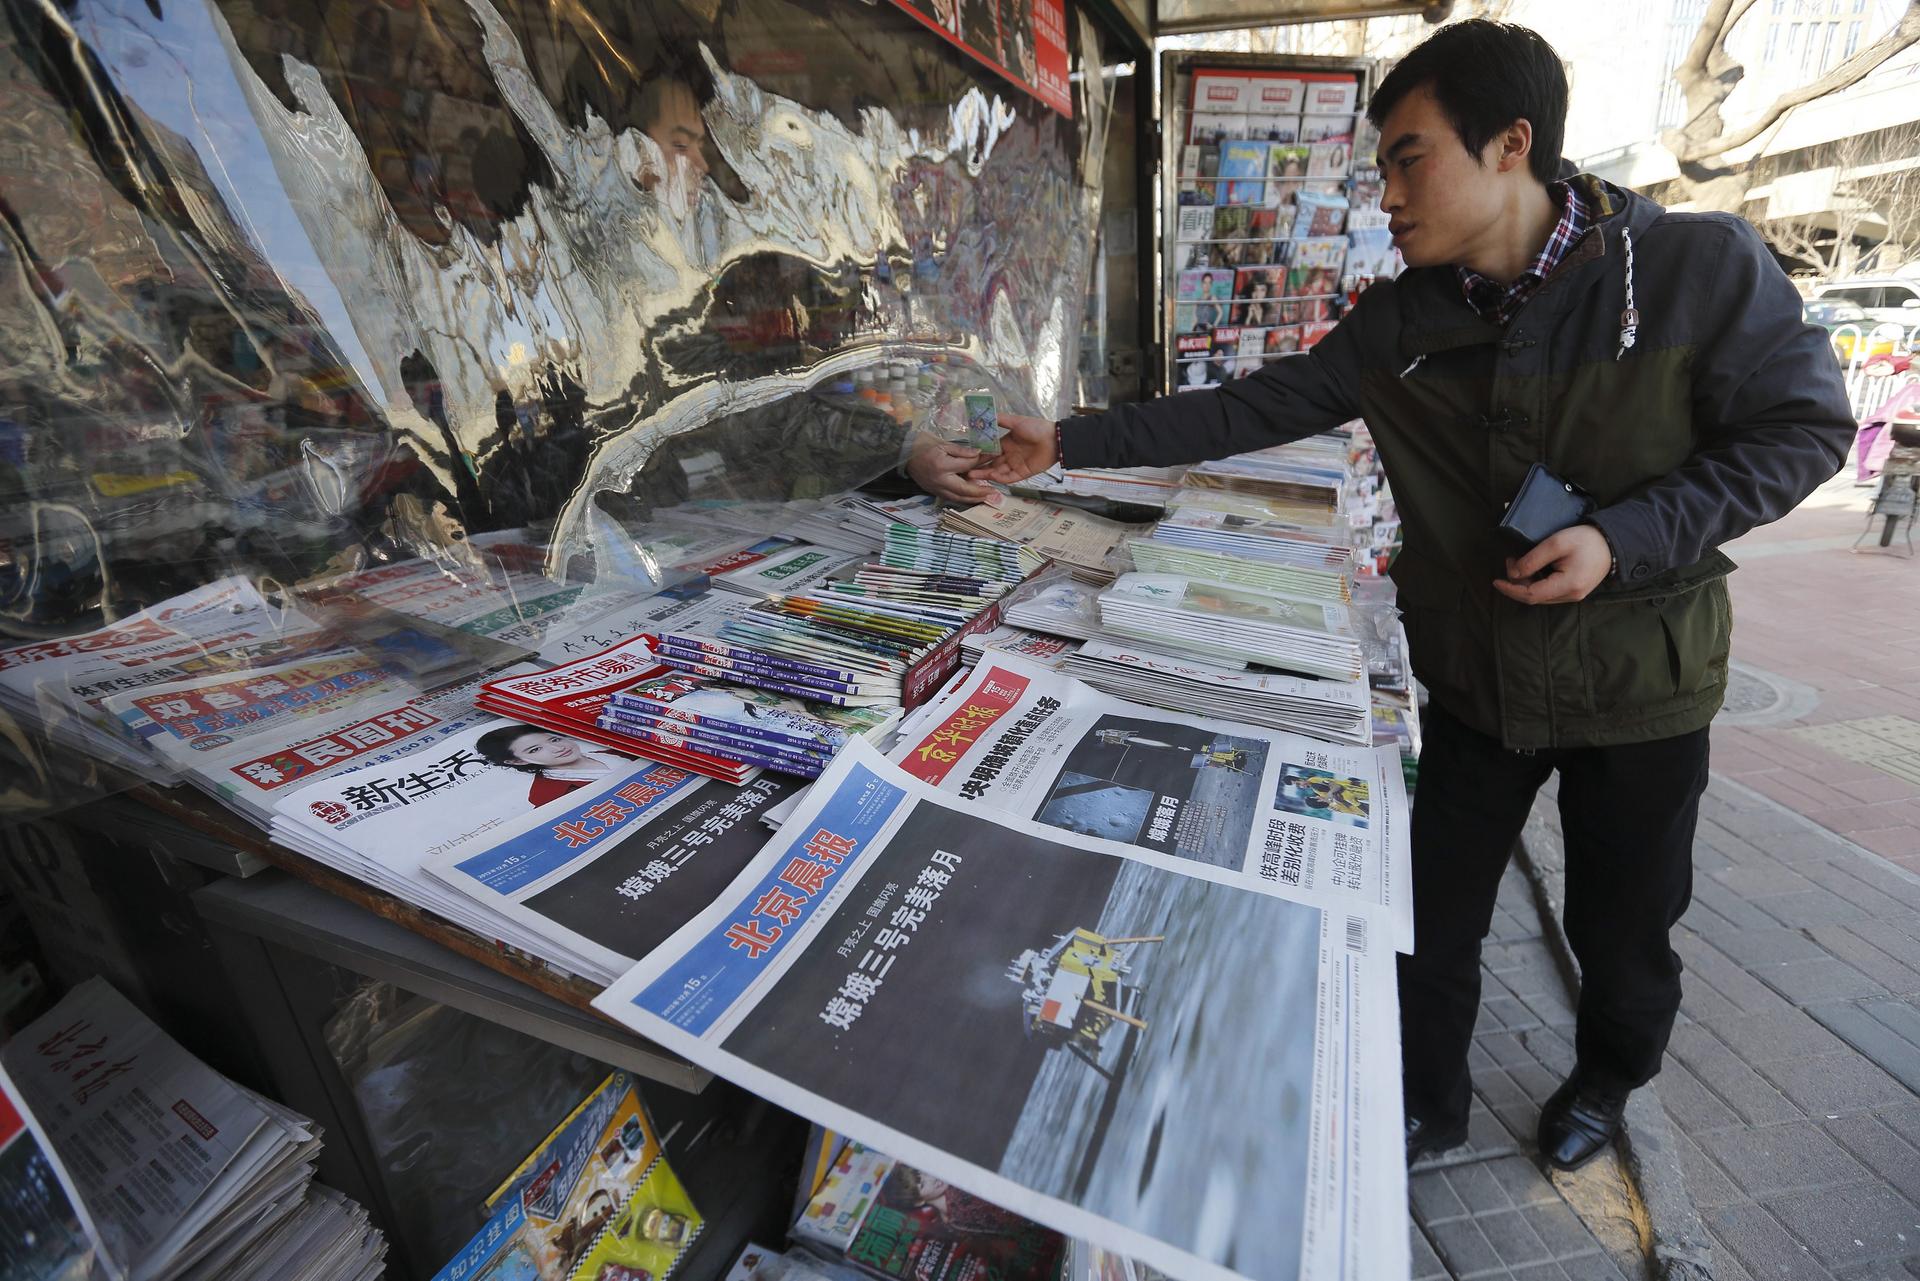 The lunar rover's landing was splashed across the front pages of mainland papers as seen from this newsstand in Beijing. Photo: EPA